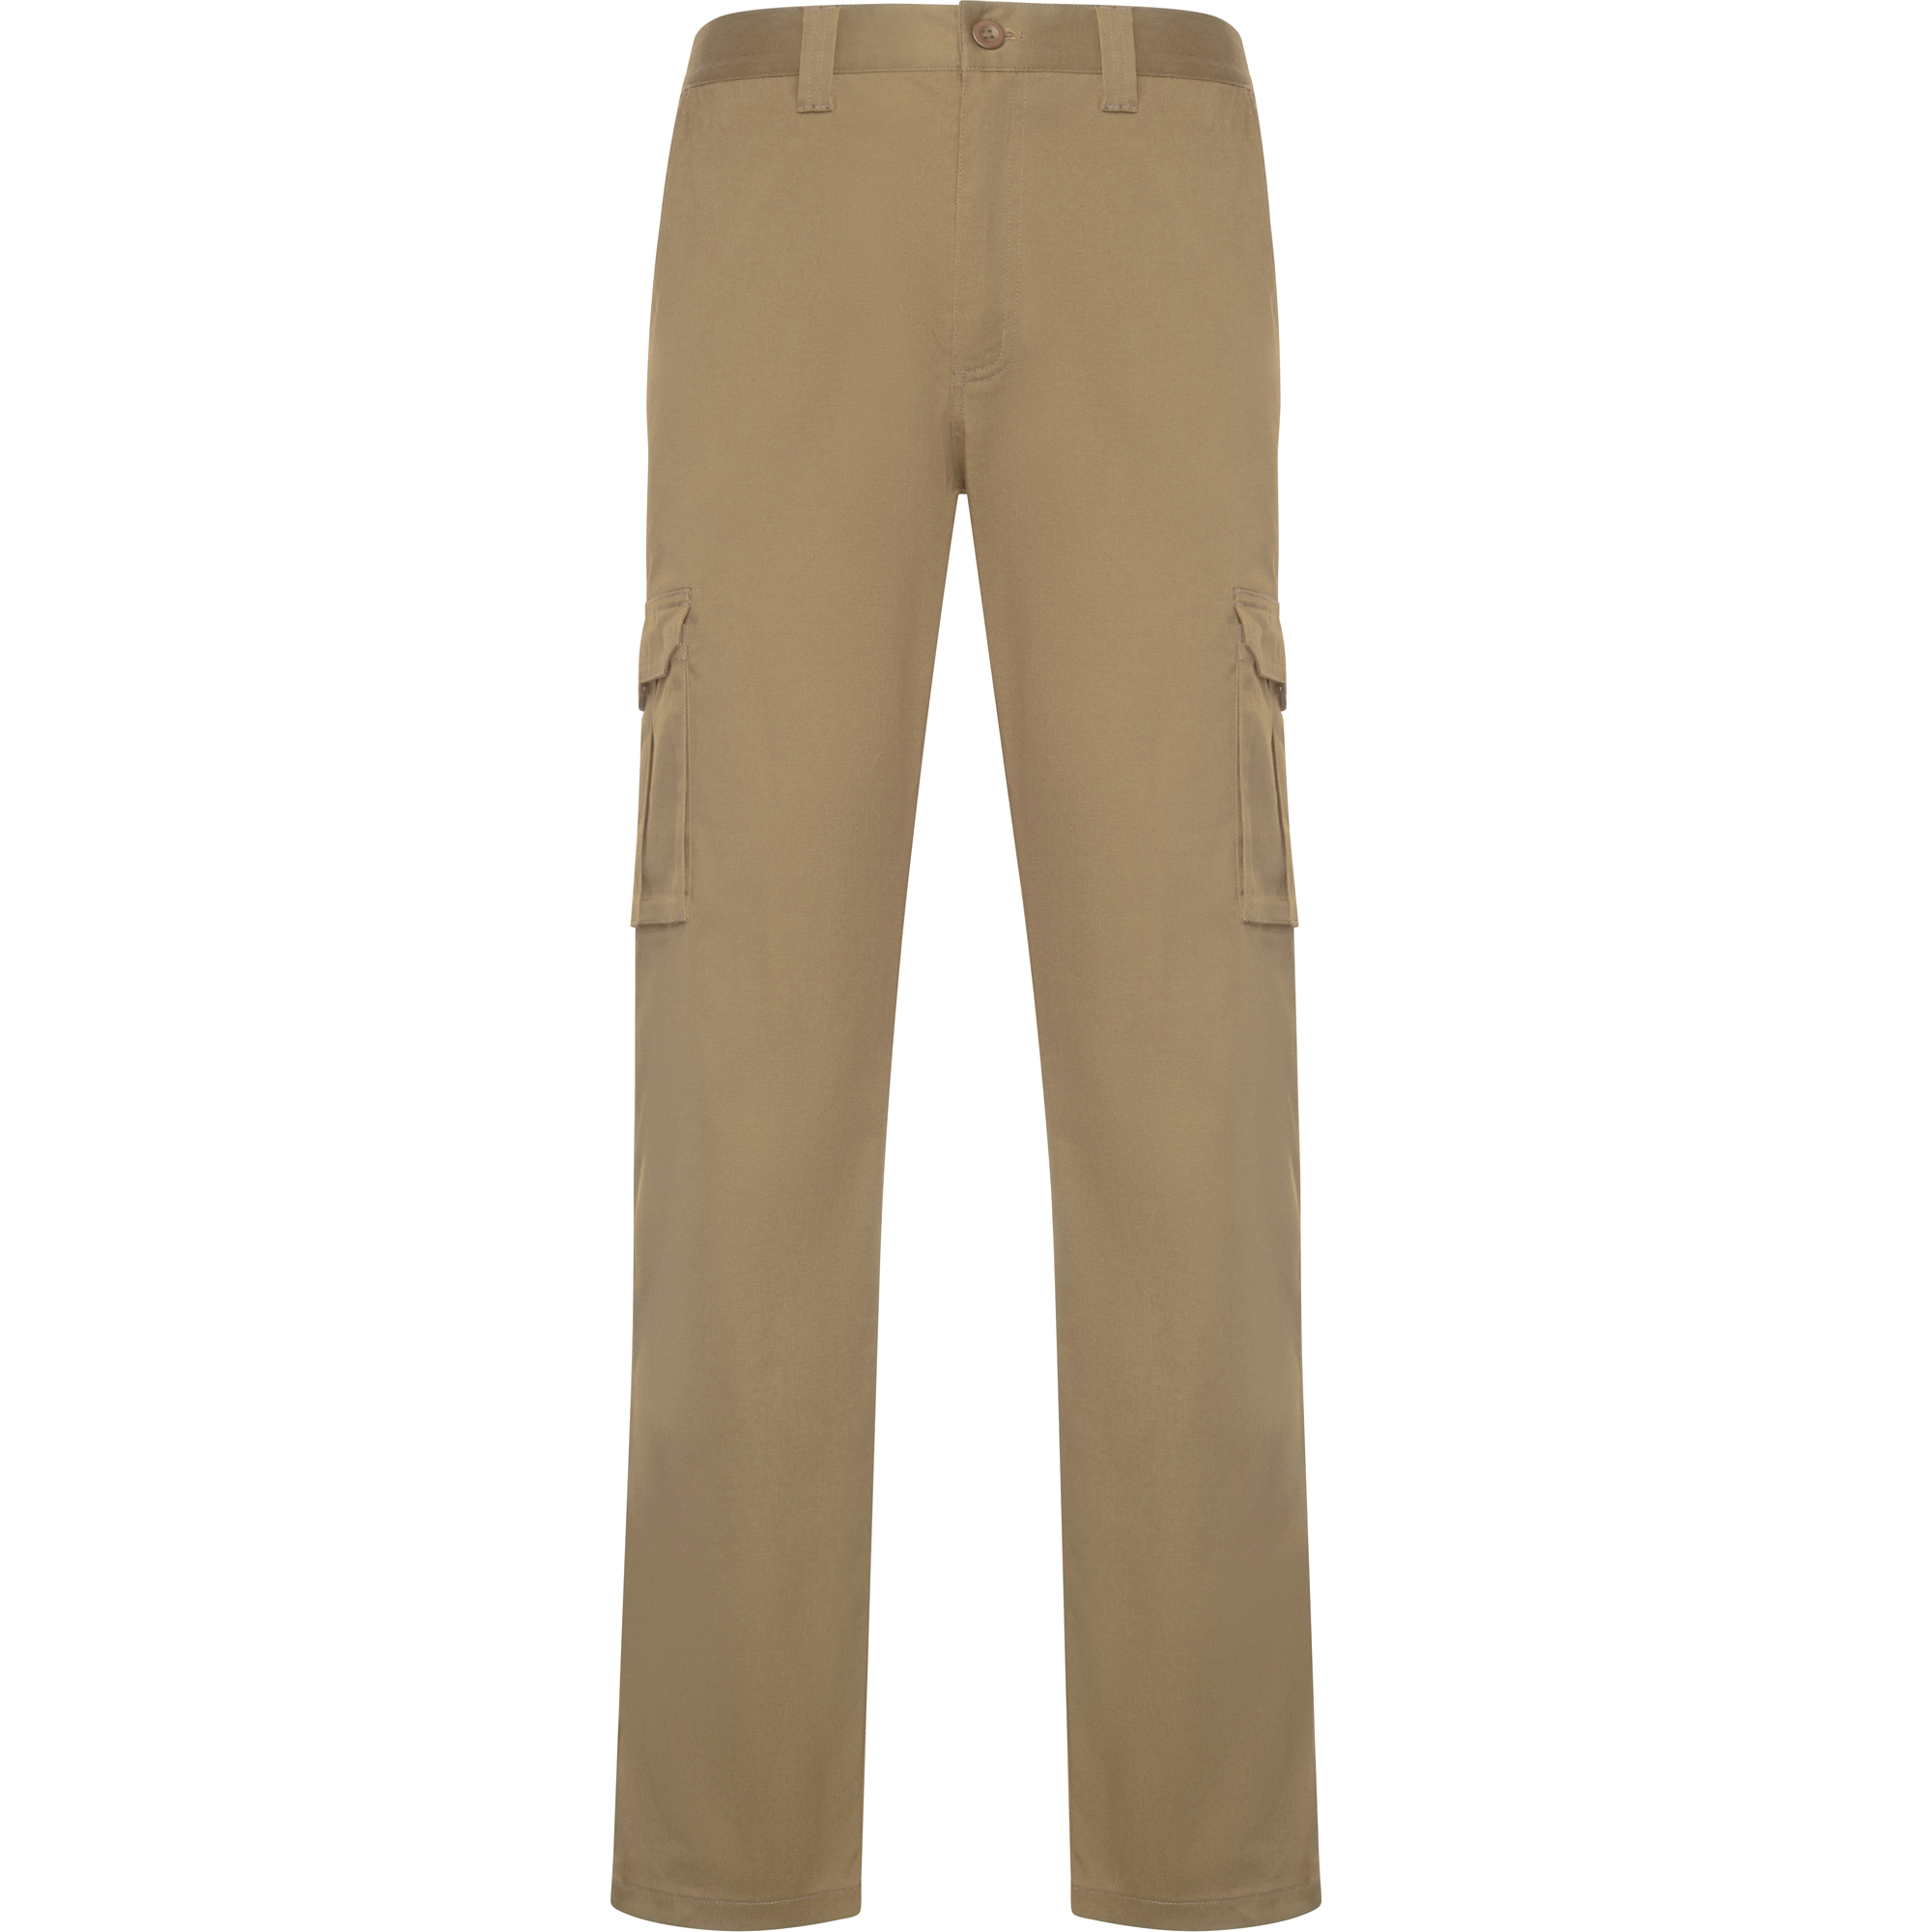 r9205-roly-daily-pantaloni-lunghi-cargo-cammello.jpg